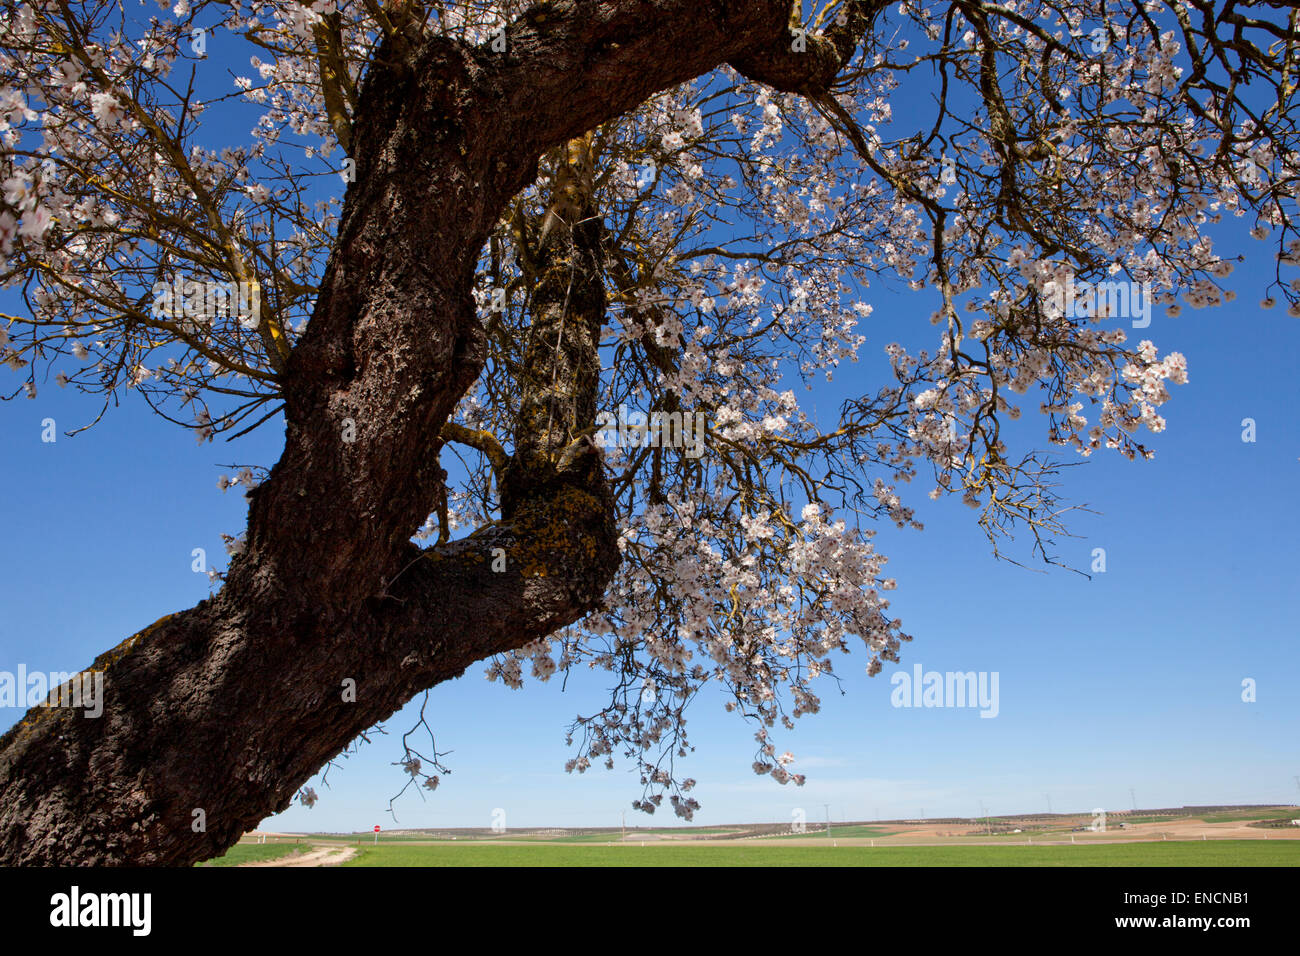 Pear tree branch in full bloom over blue sunny sky Stock Photo